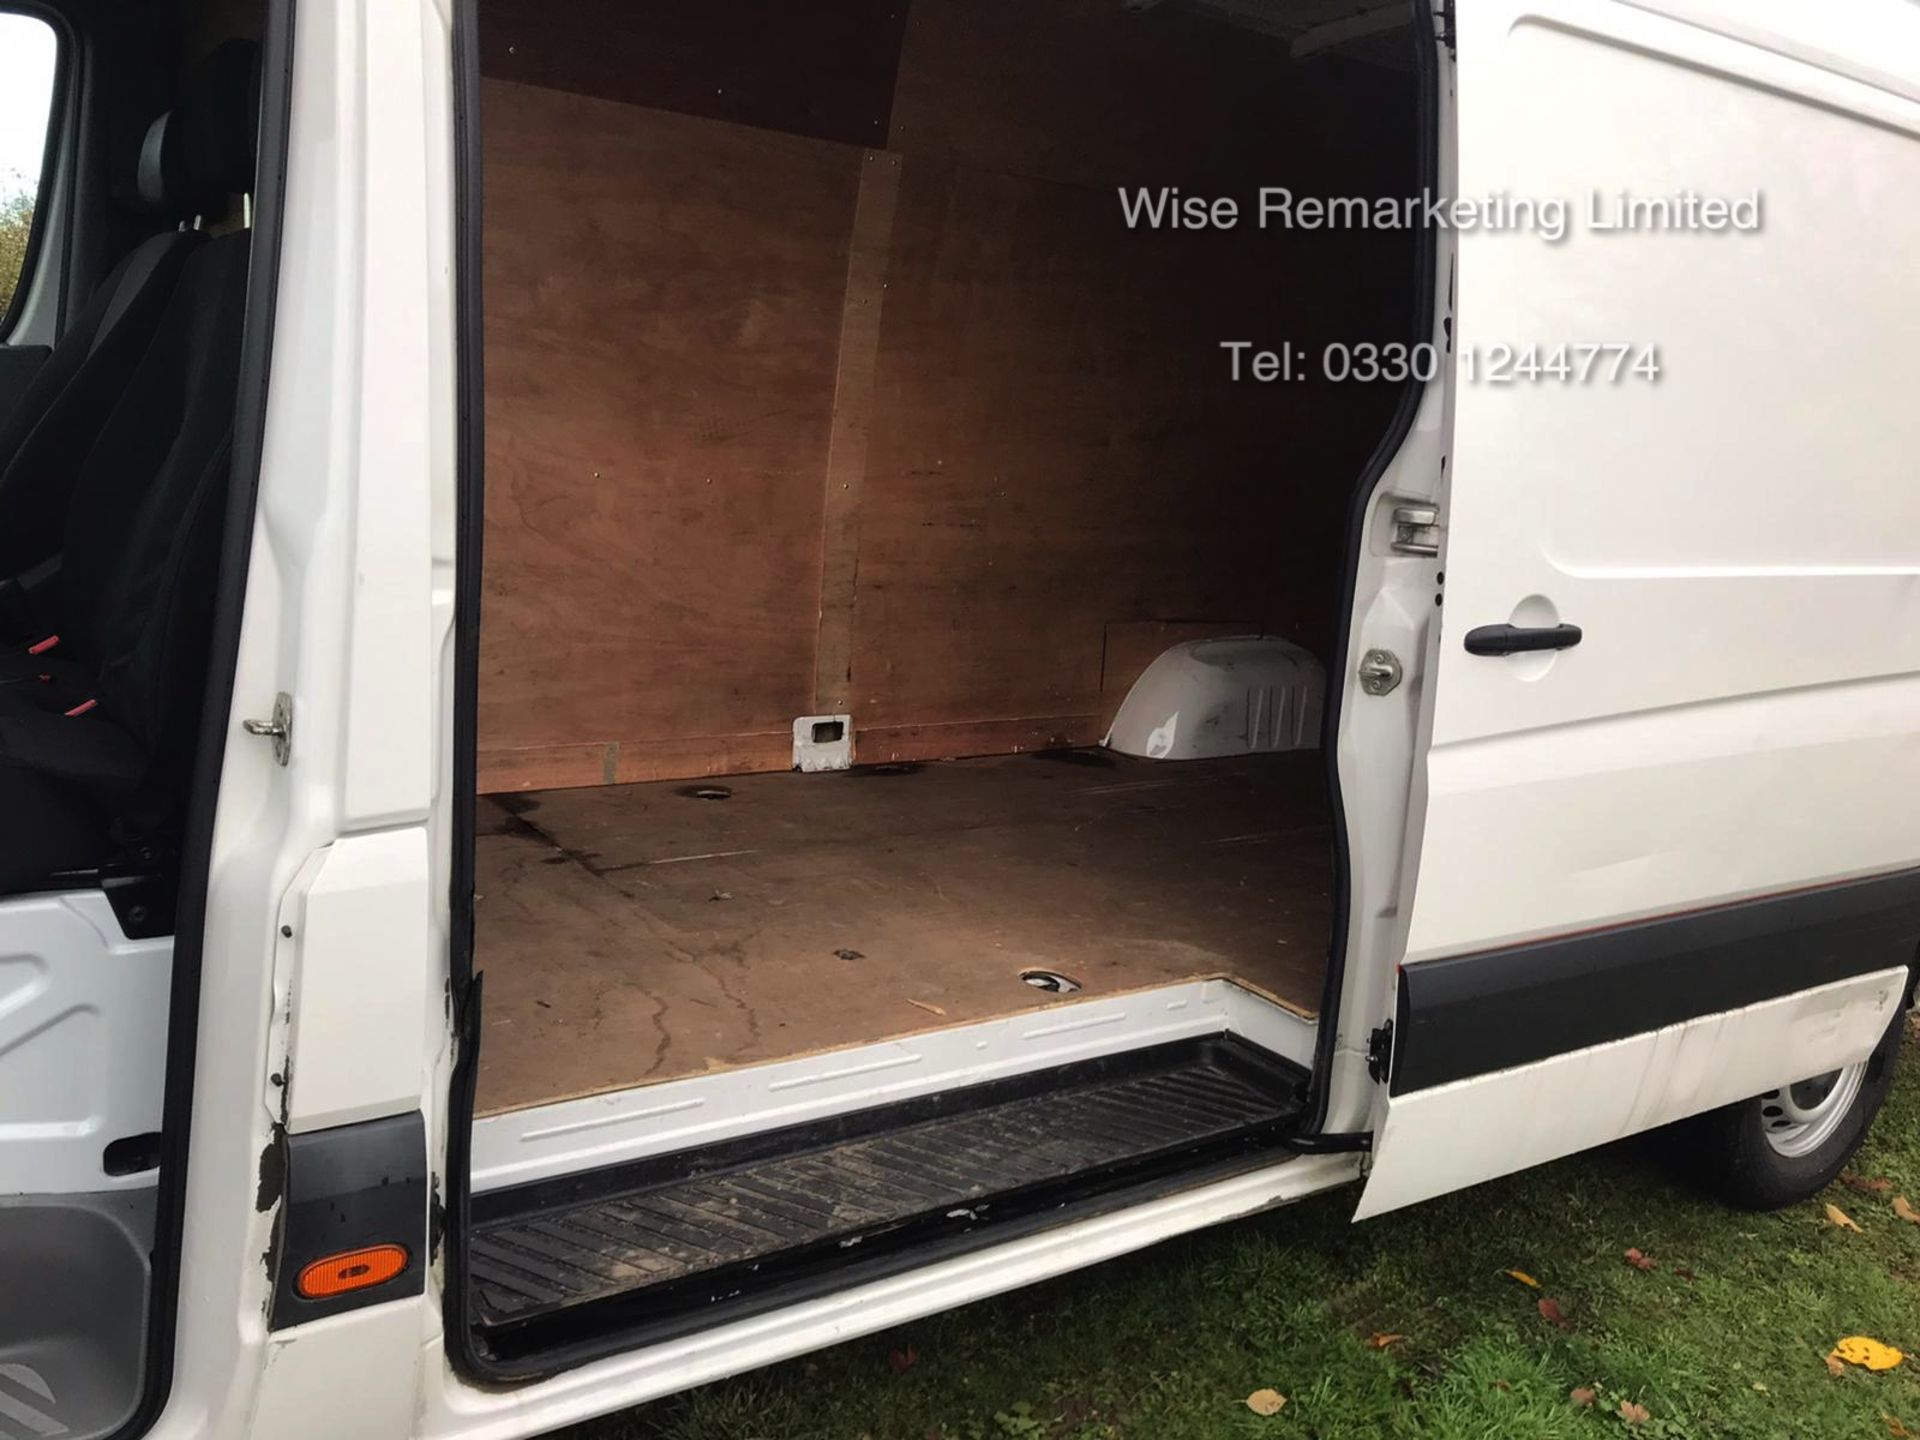 Volkswagen Crafter CR35 Startline 2.0l TDi - LWB - 2016 Model -1 Keeper From New - Service History - Image 5 of 15